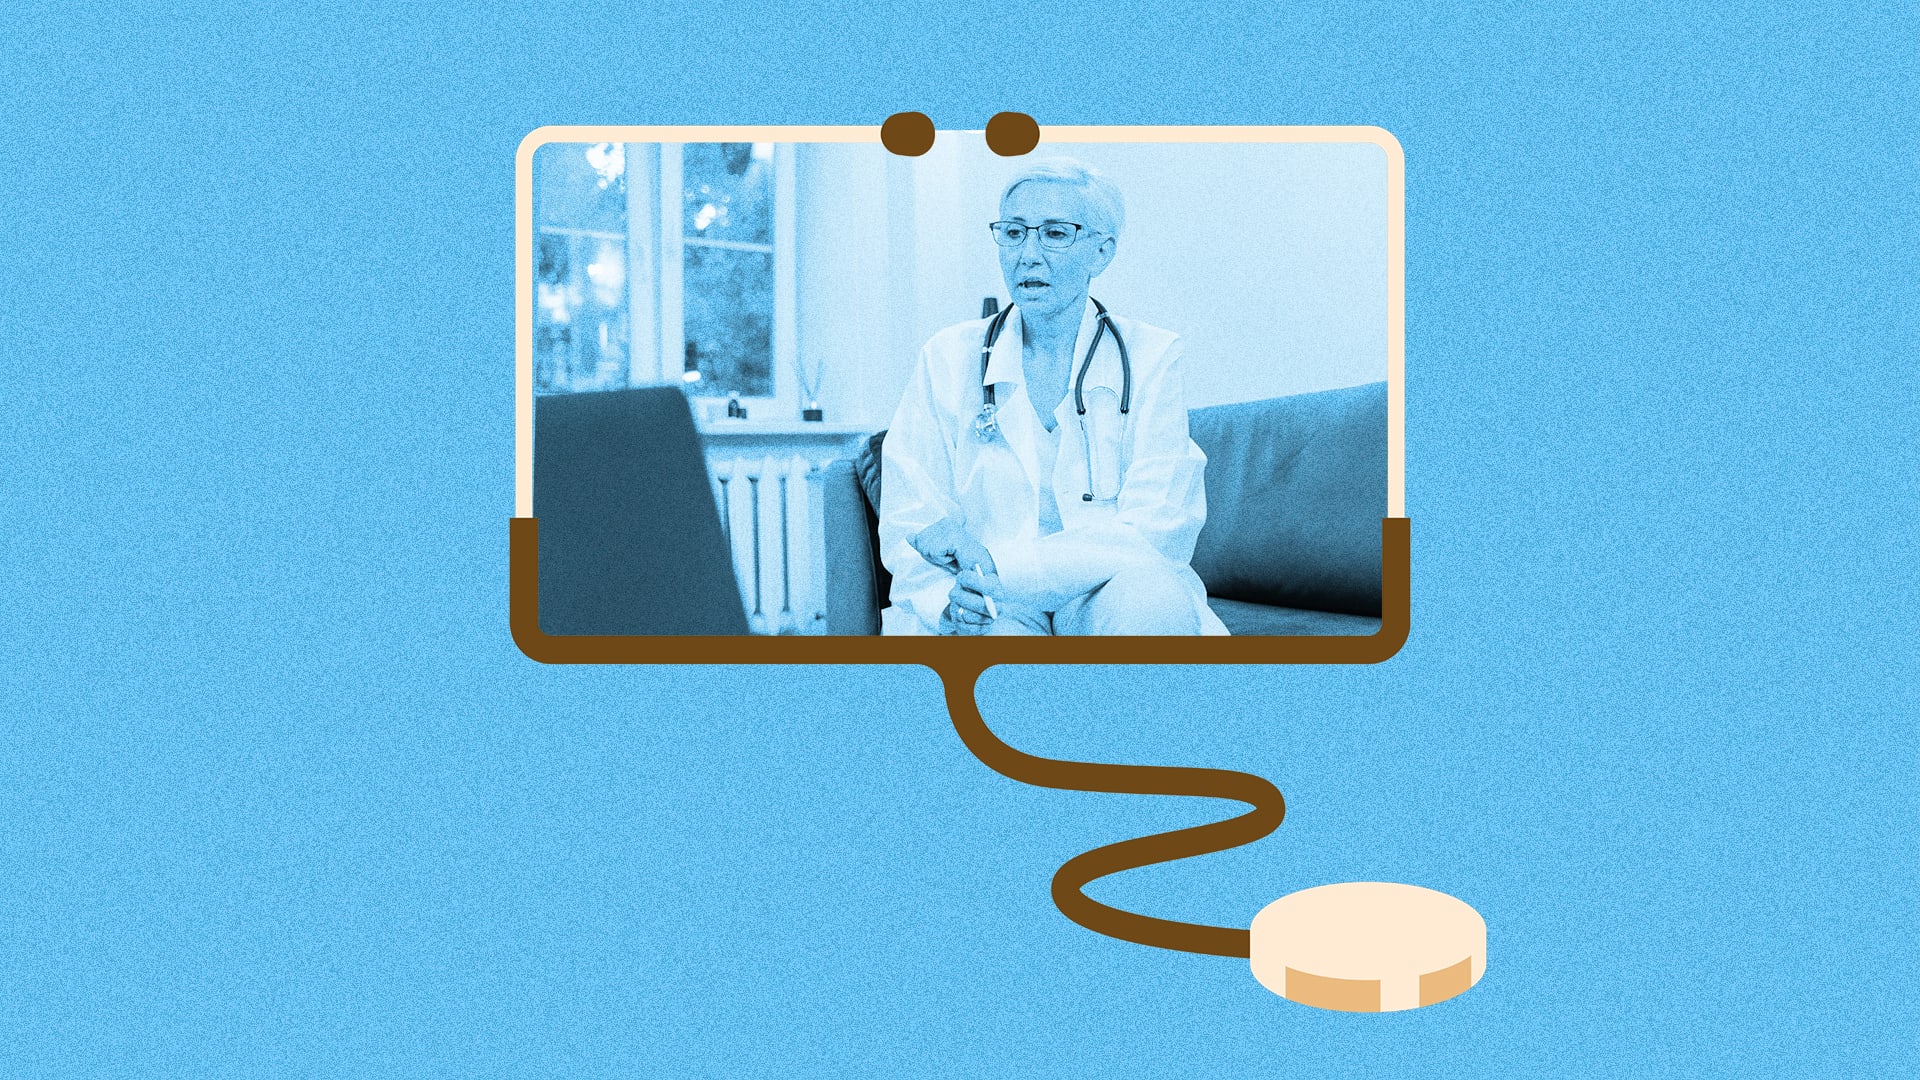 After the SCOTUS leak, telemedicine startups are at a crossroads